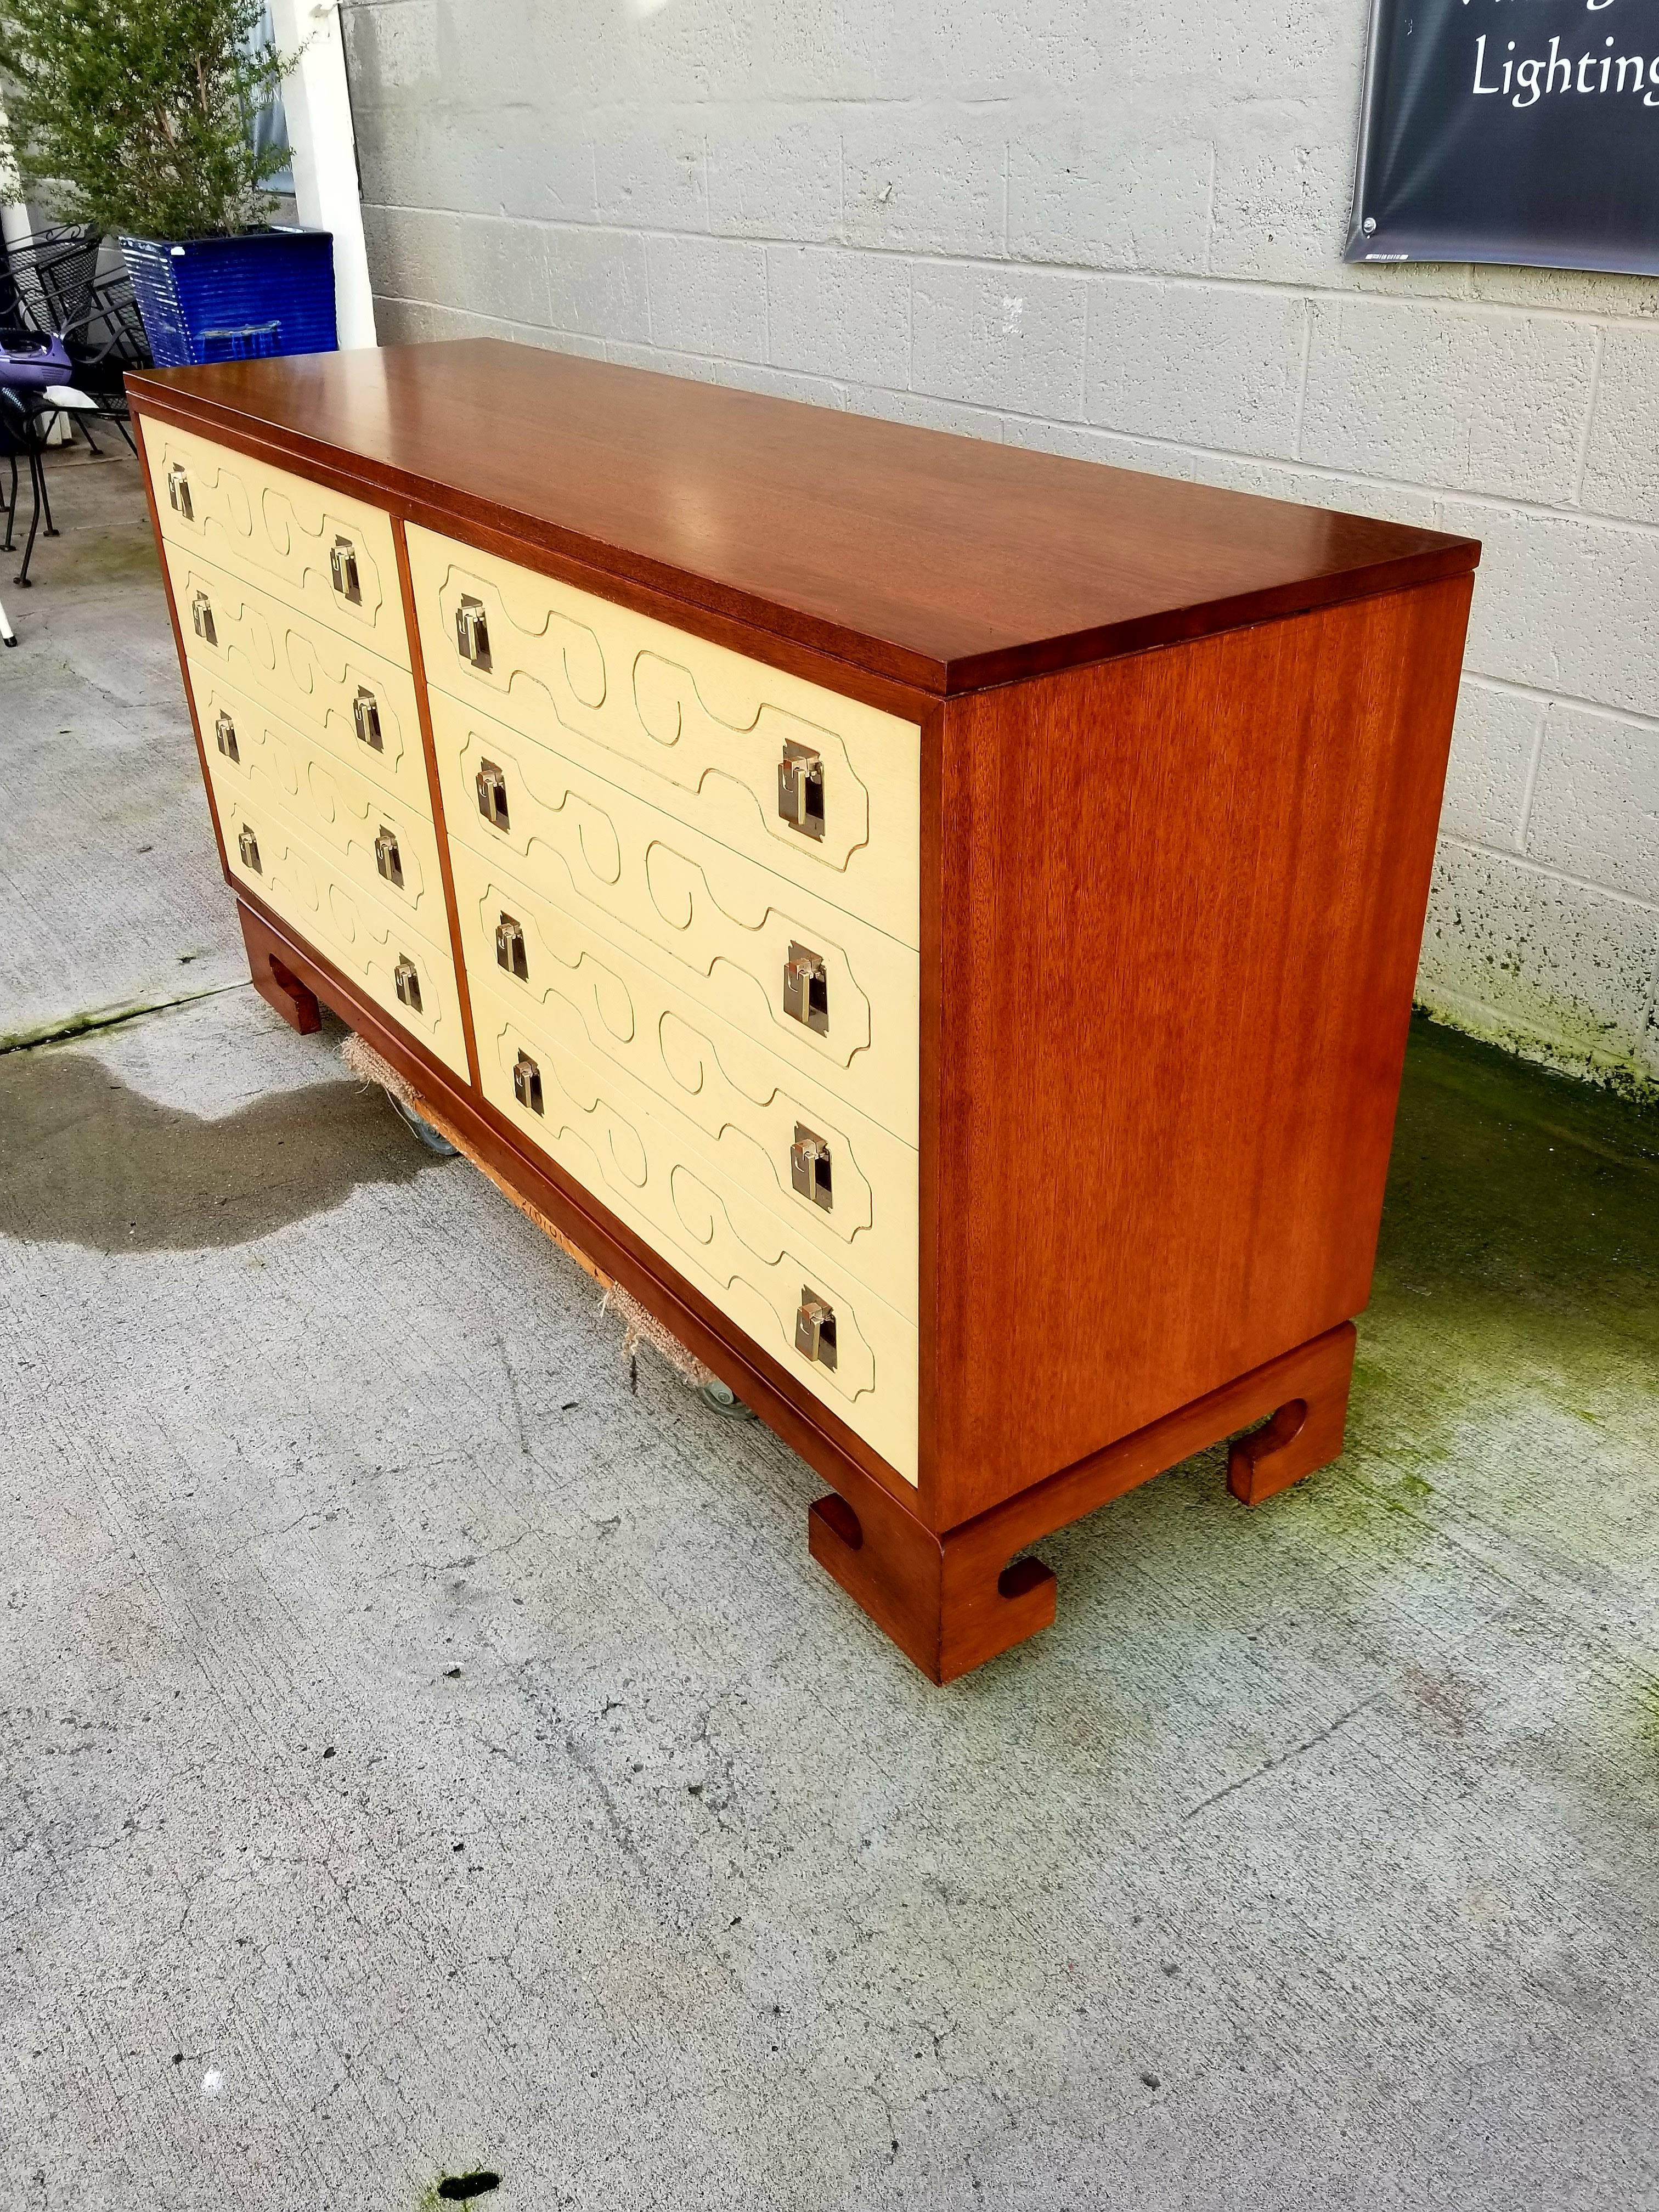 A lacquered eight-drawer dresser in the manner of Tommi Parzinger and/or Dorothy Draper. Exceptional craftsmanship and materials. Base, top and drawer fronts are solid mahogany. Secondary woods are also solid mahogany. Steel drawer glides offer